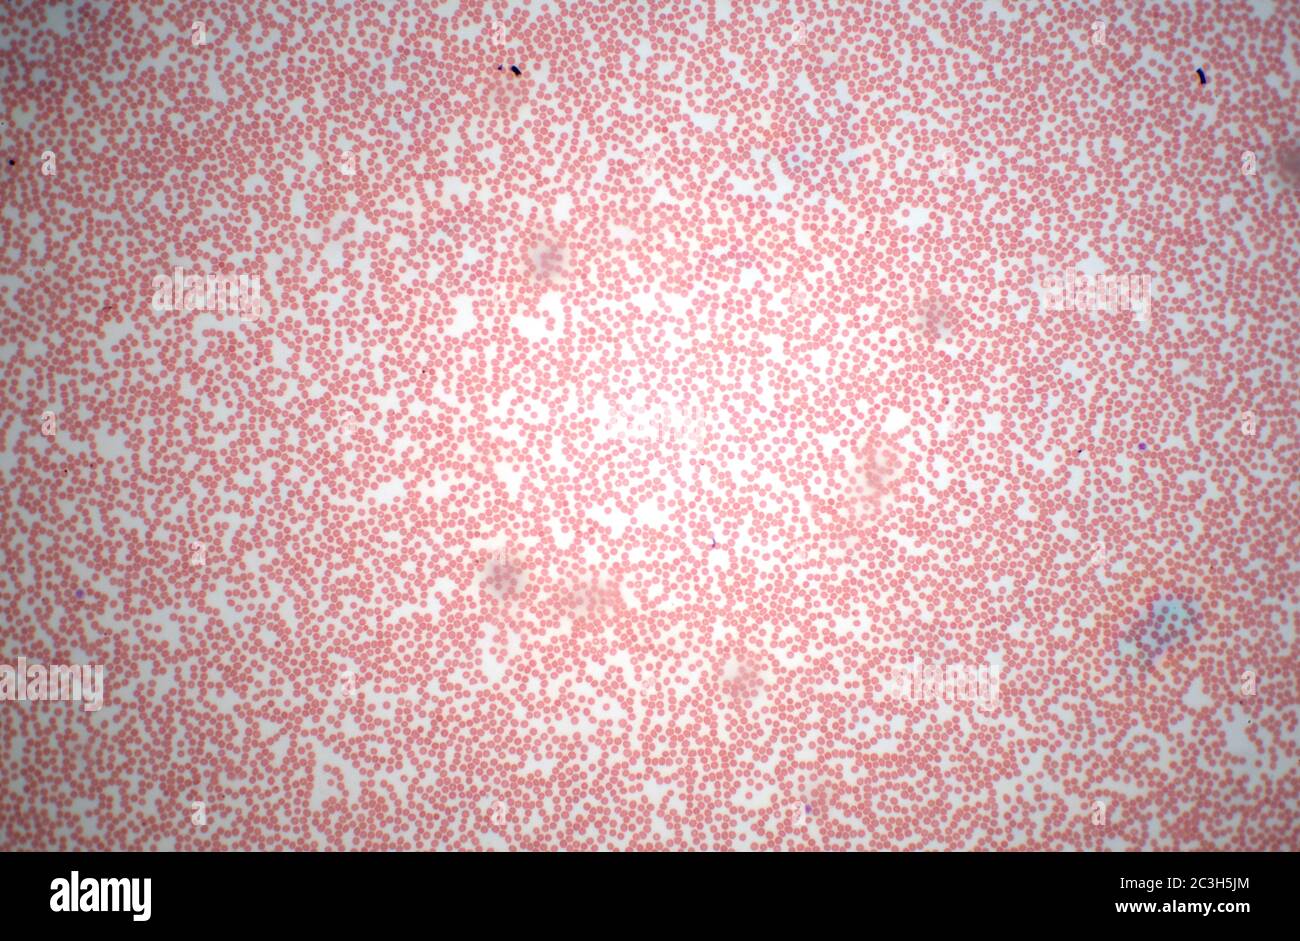 Microscope slide smear sample of human blood cells Stock Photo